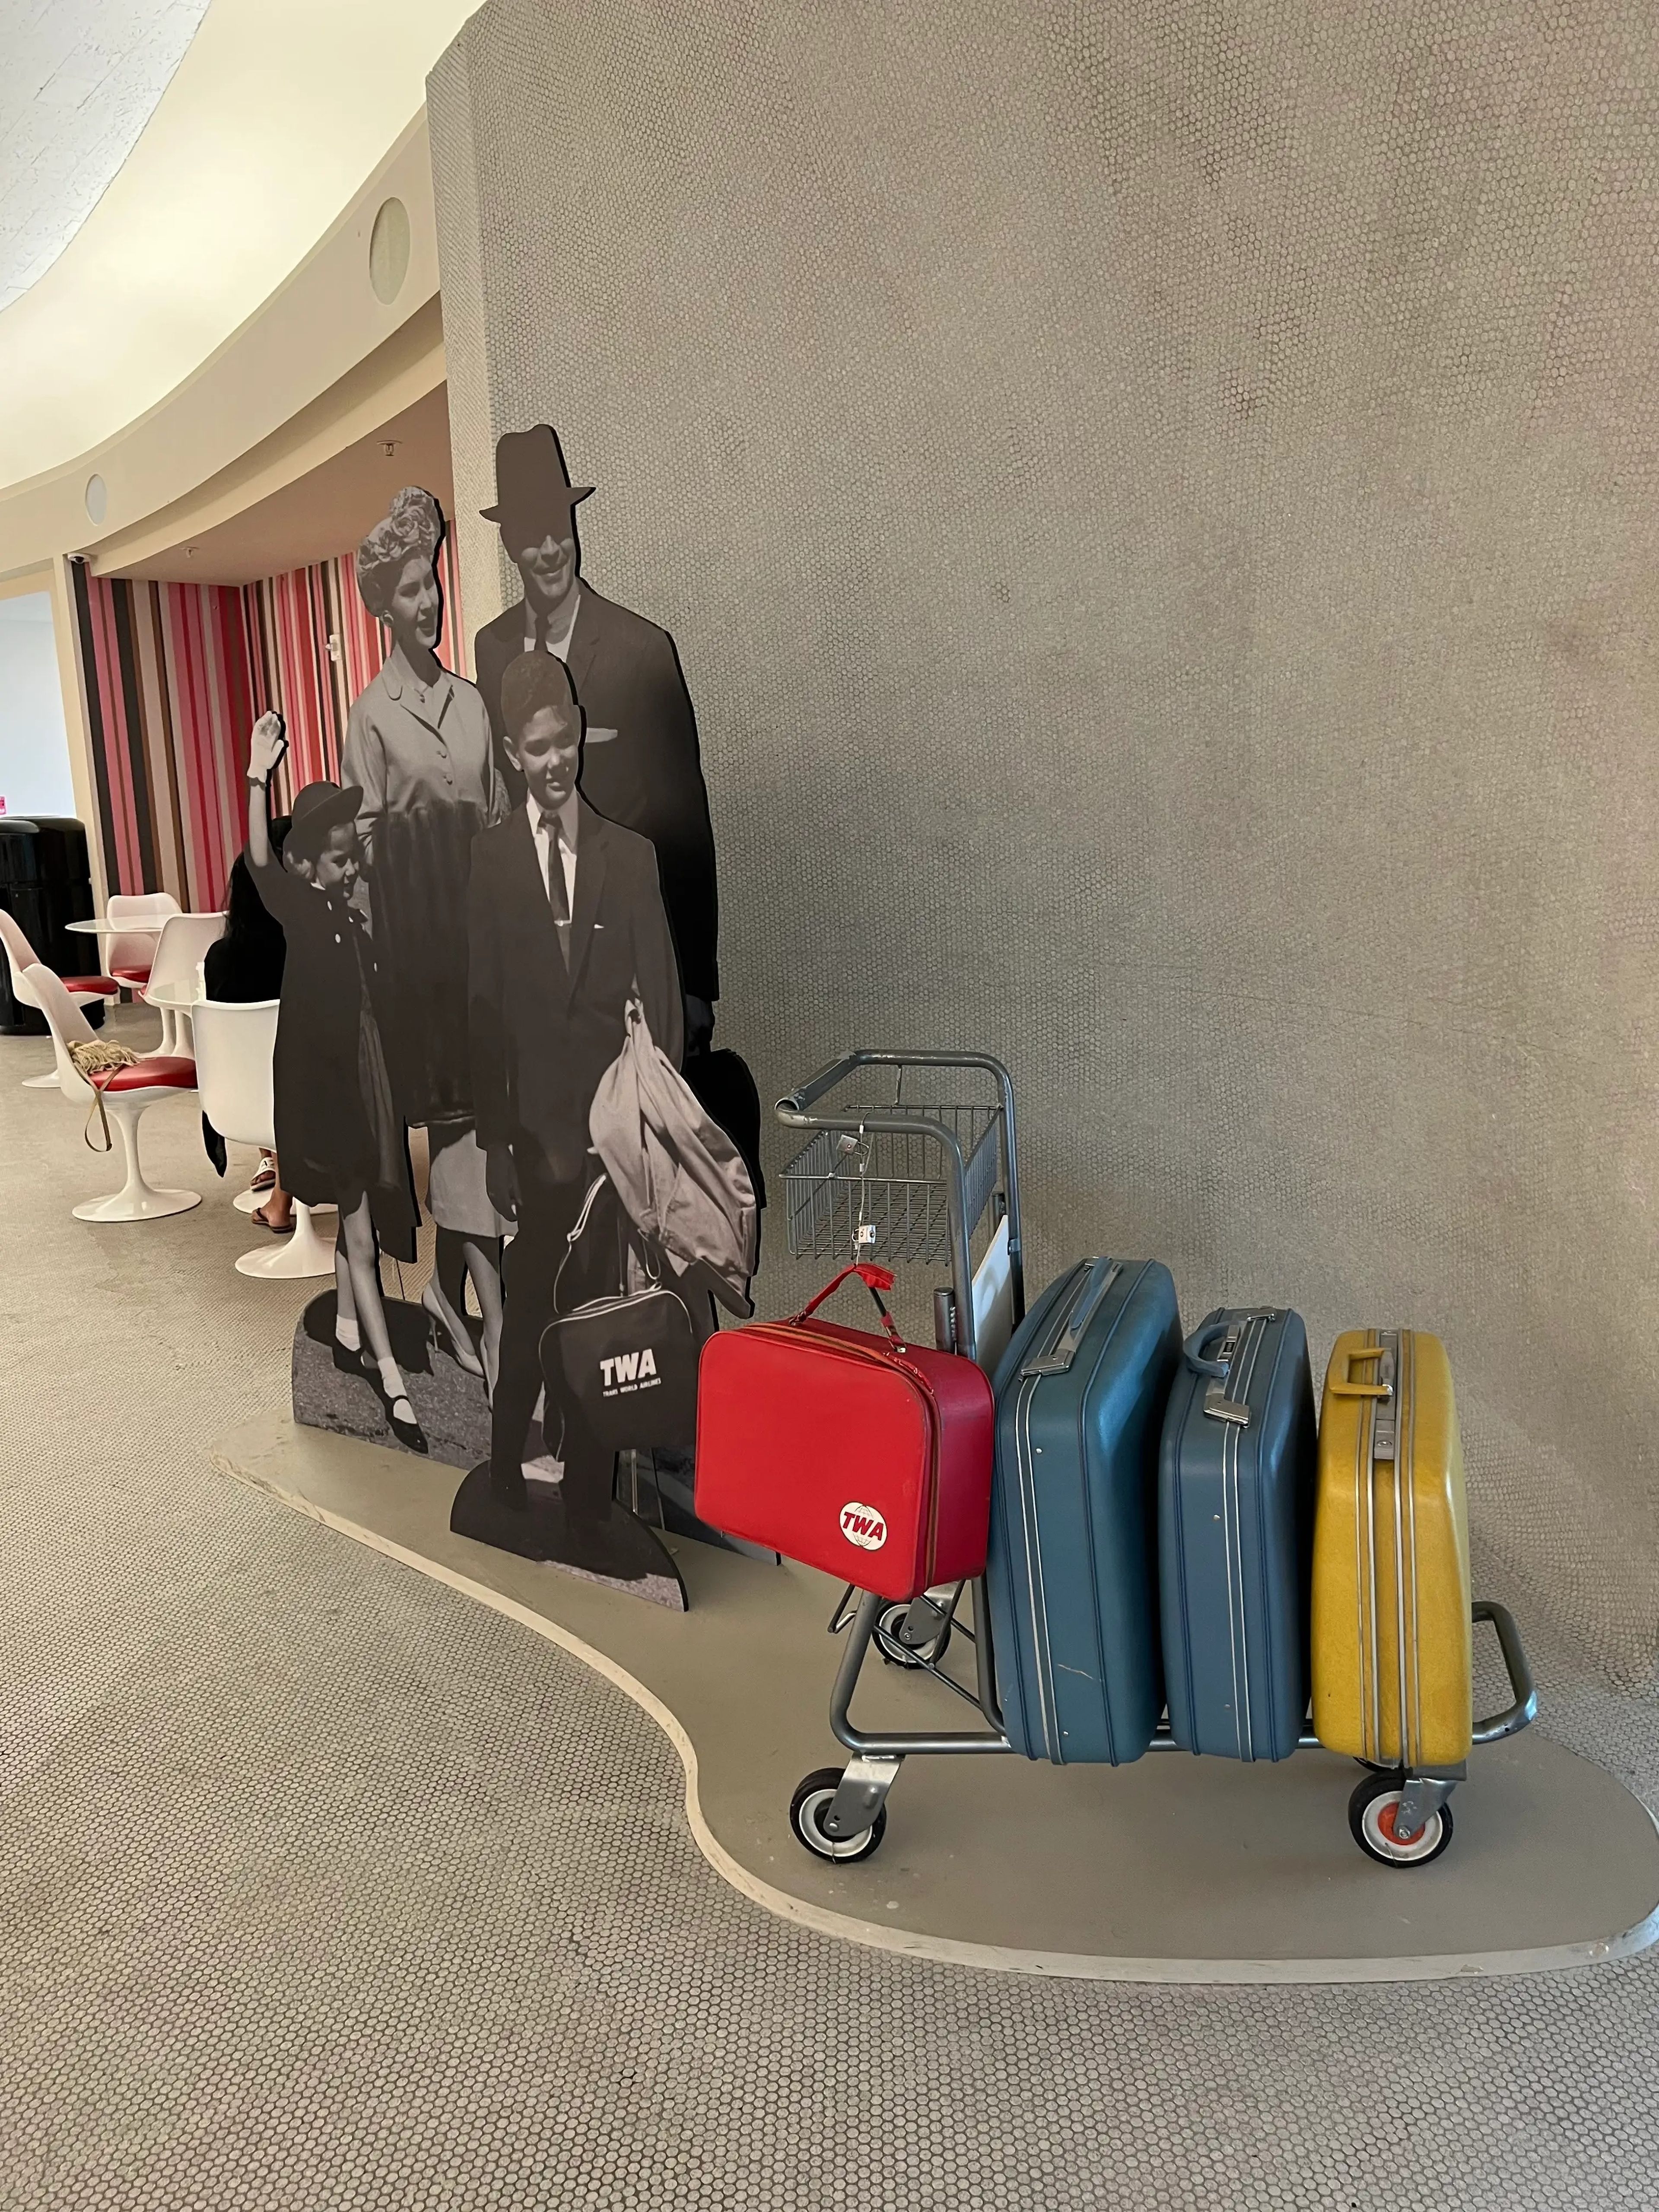 TWA Hotel poster with luggage